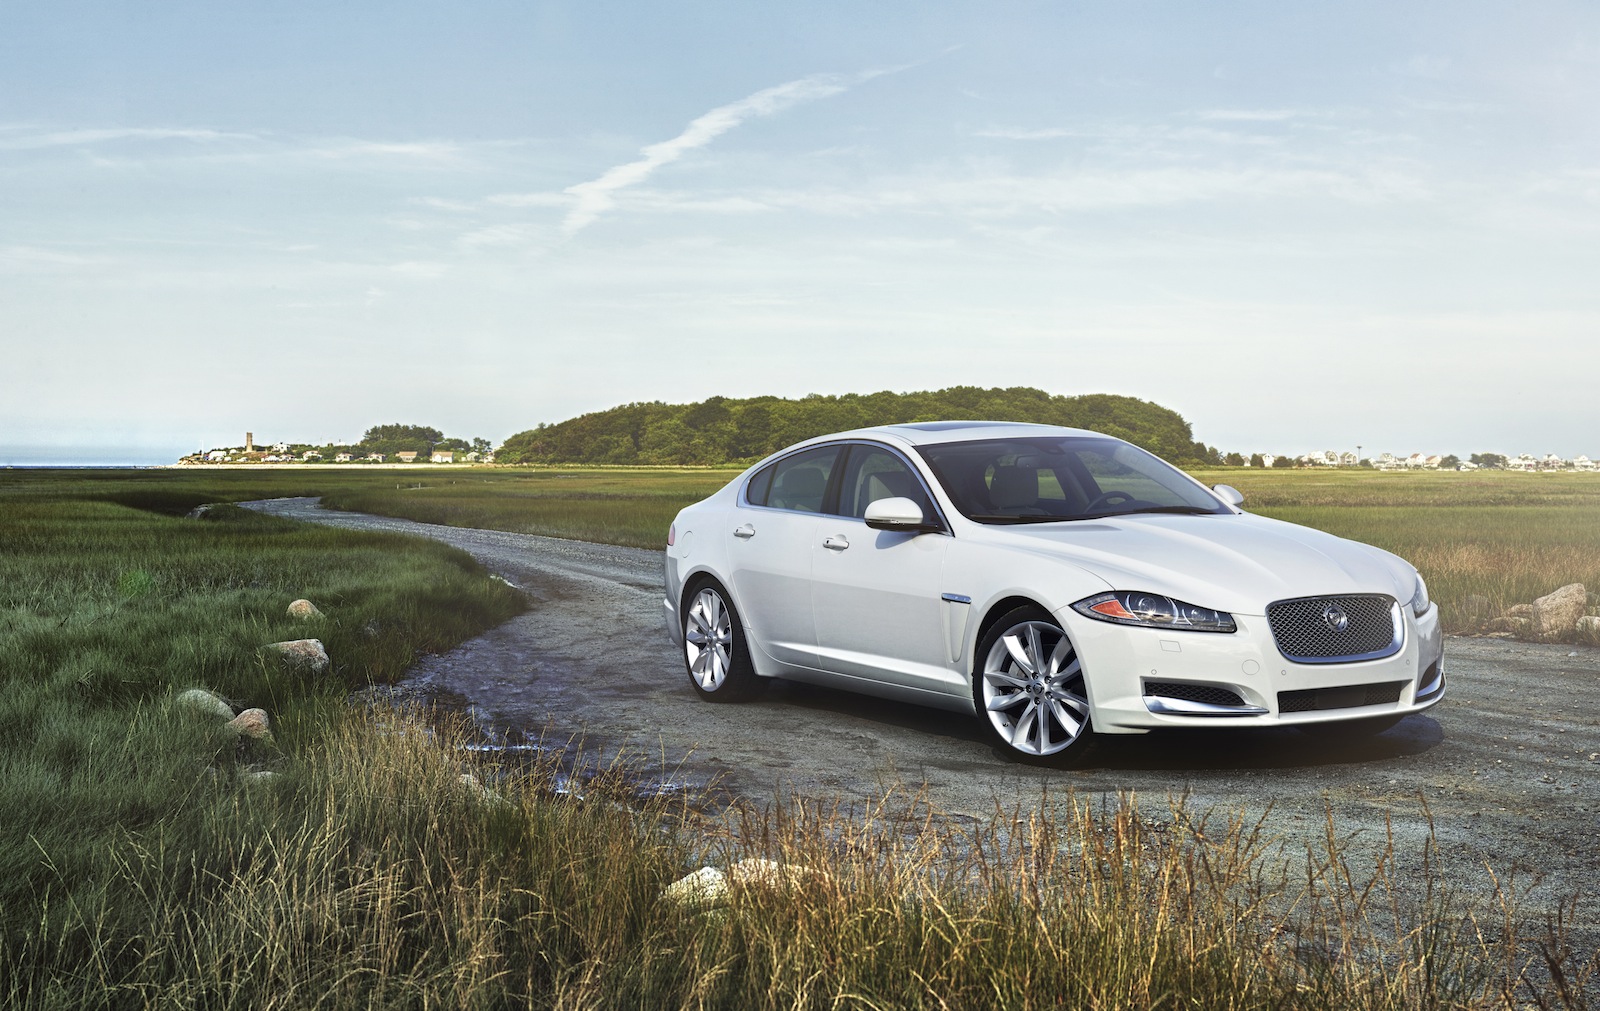 2013 Jaguar XF: From V-8 To Turbo Four For Fuel Efficiency